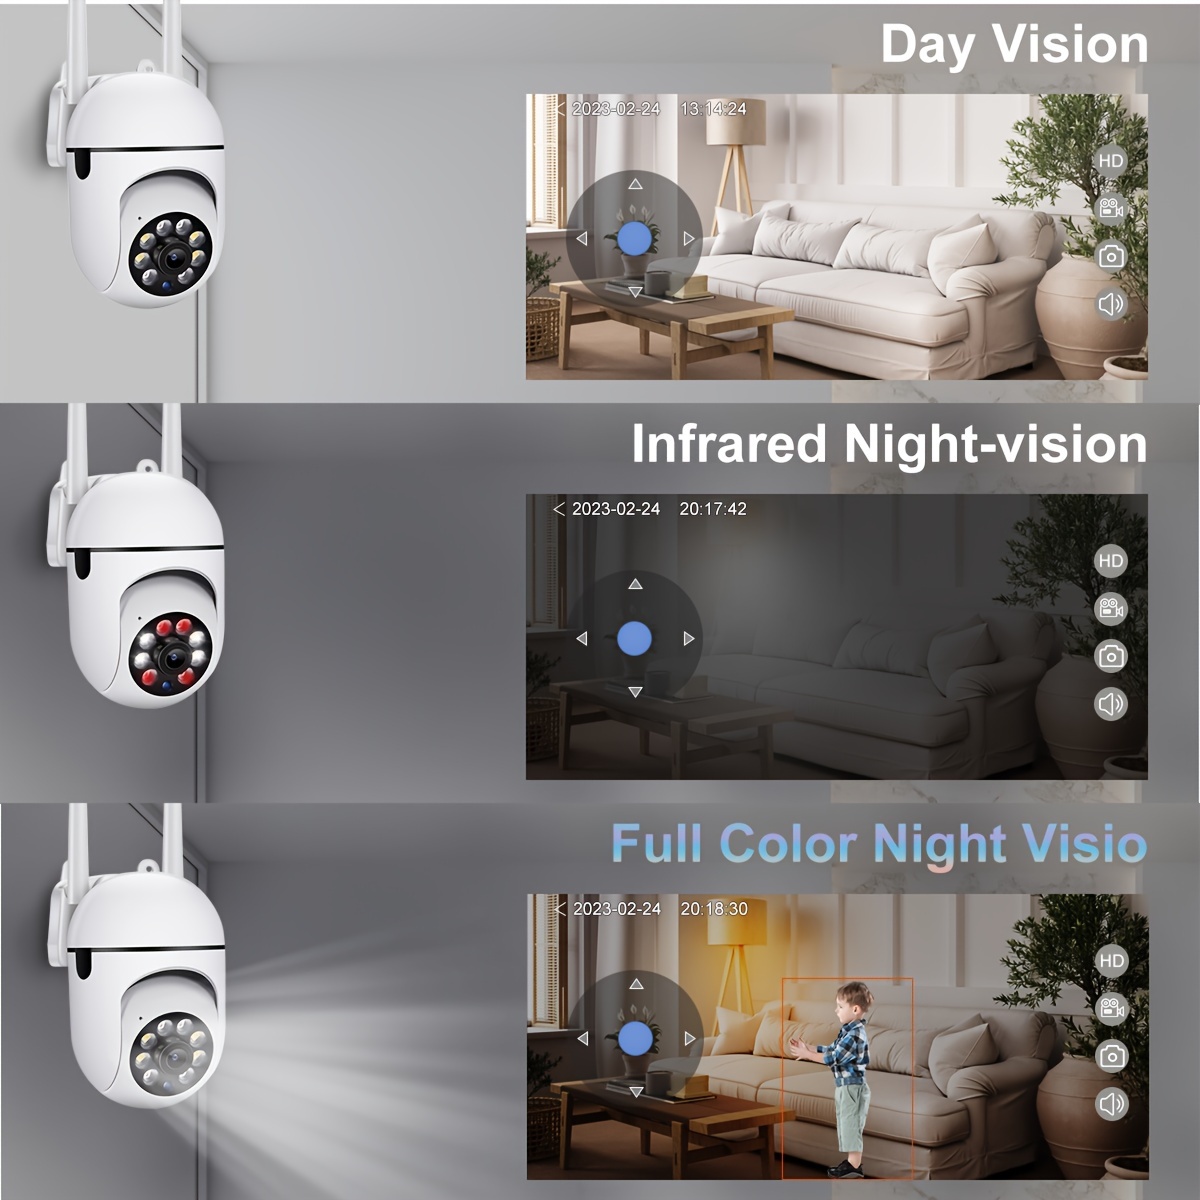 1pc 4pcs outdoor cameras hd ptz wifi video wireless surveillance ip monitor security protection smart auto tracking home night vision